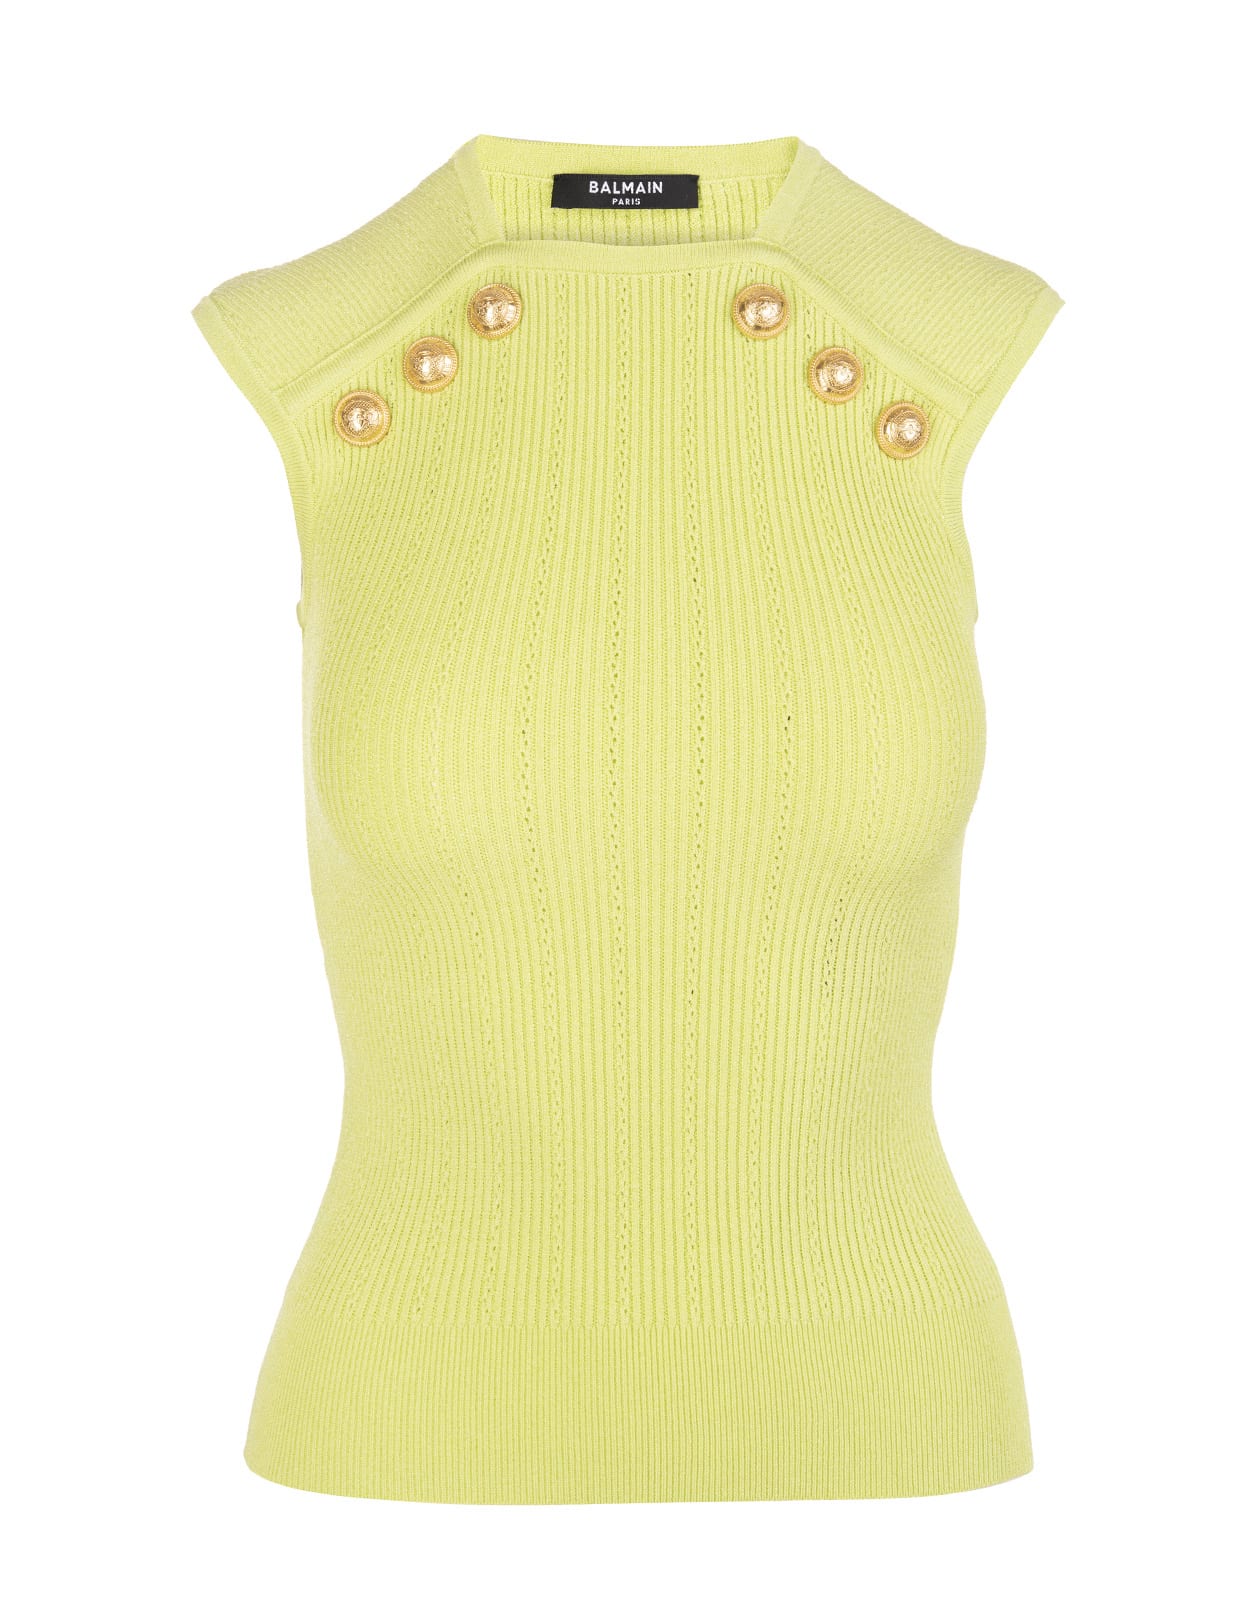 Balmain Lime Green Knitted Top With Golden Buttons